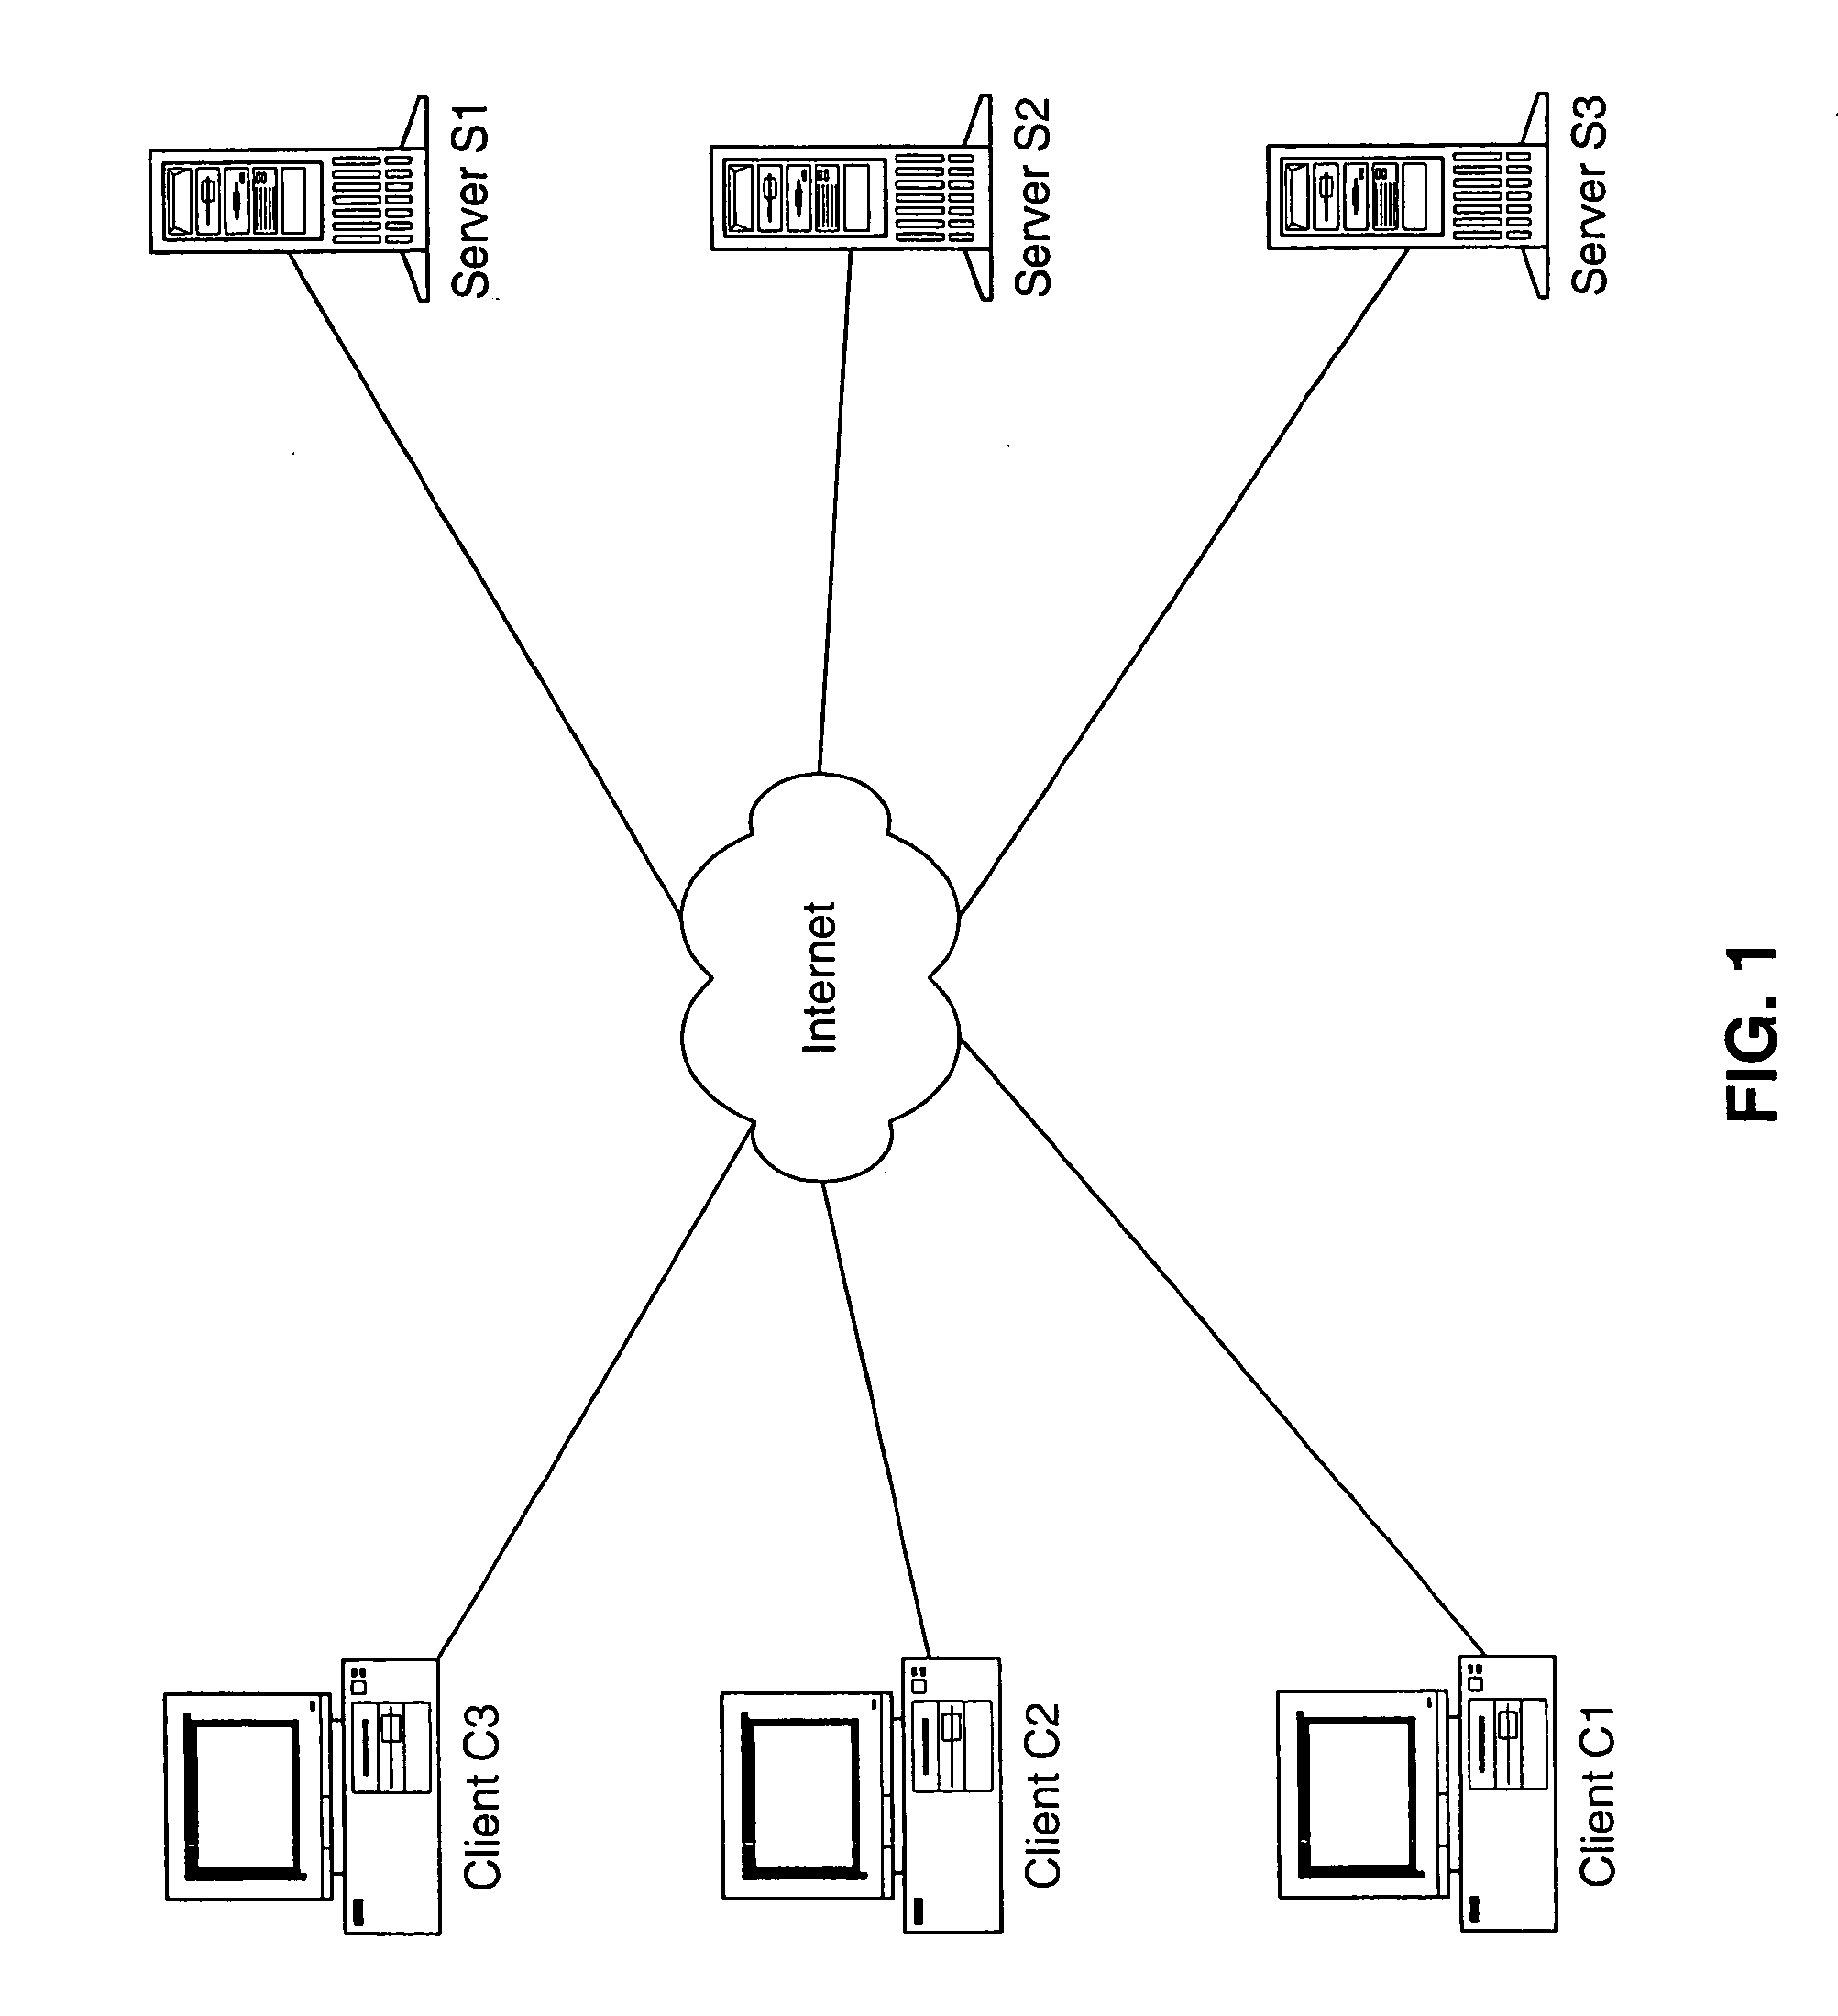 System, method and computer program product for providing unified authentication services for online applications